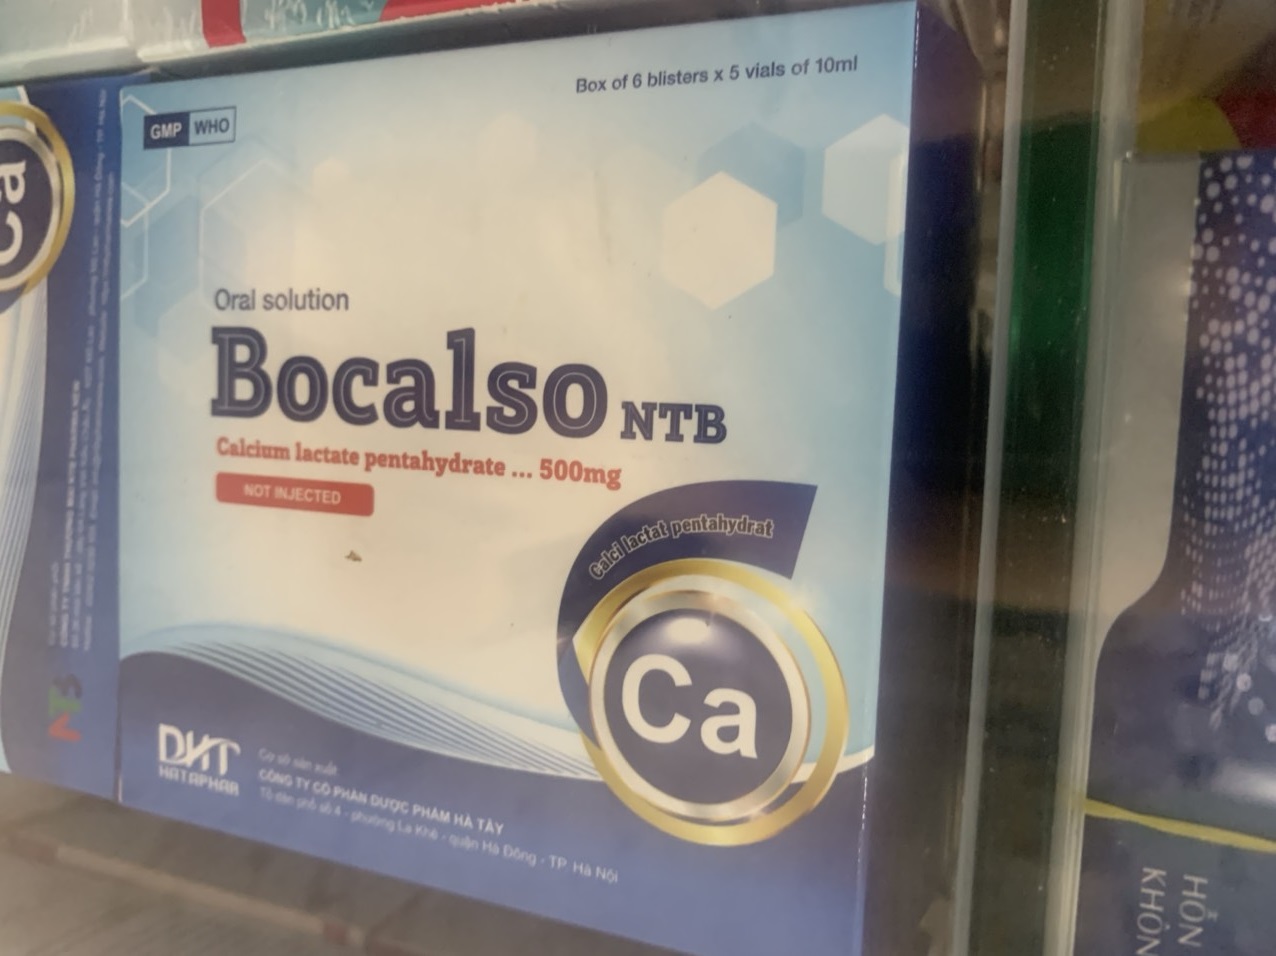 Bocalso NTB 10ml